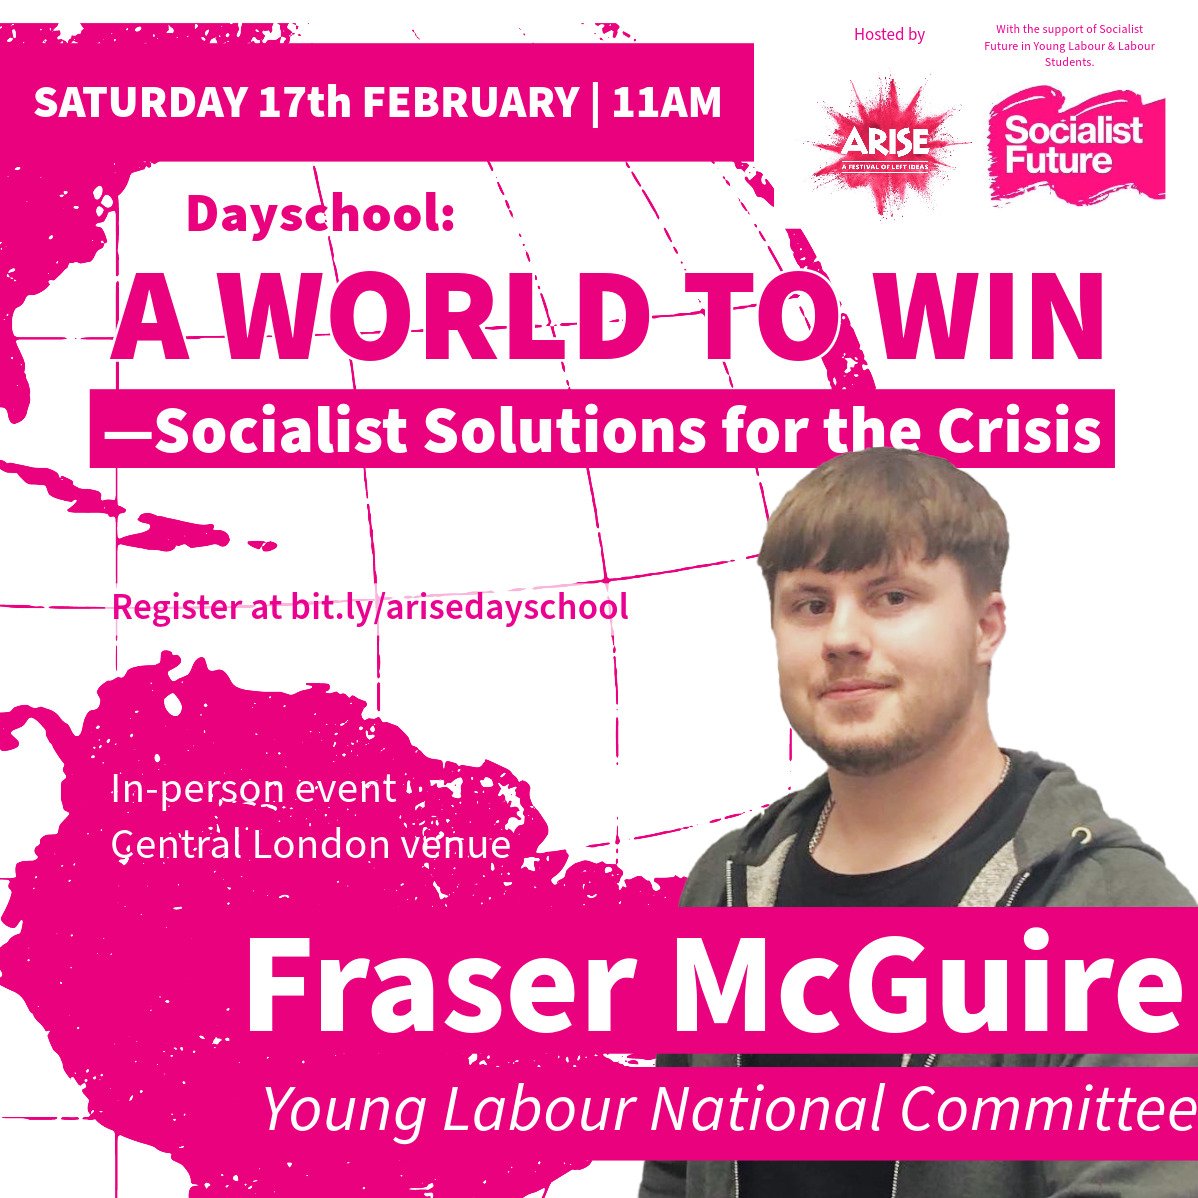 Young Labour have a strong track record of supporting struggles against austerity and making the case for a bold economic alternative- come and hear from NC member @FraserMcGuire_ at this dayschool in London next February organised by the @Arise_Festival: bit.ly/arisedayschool